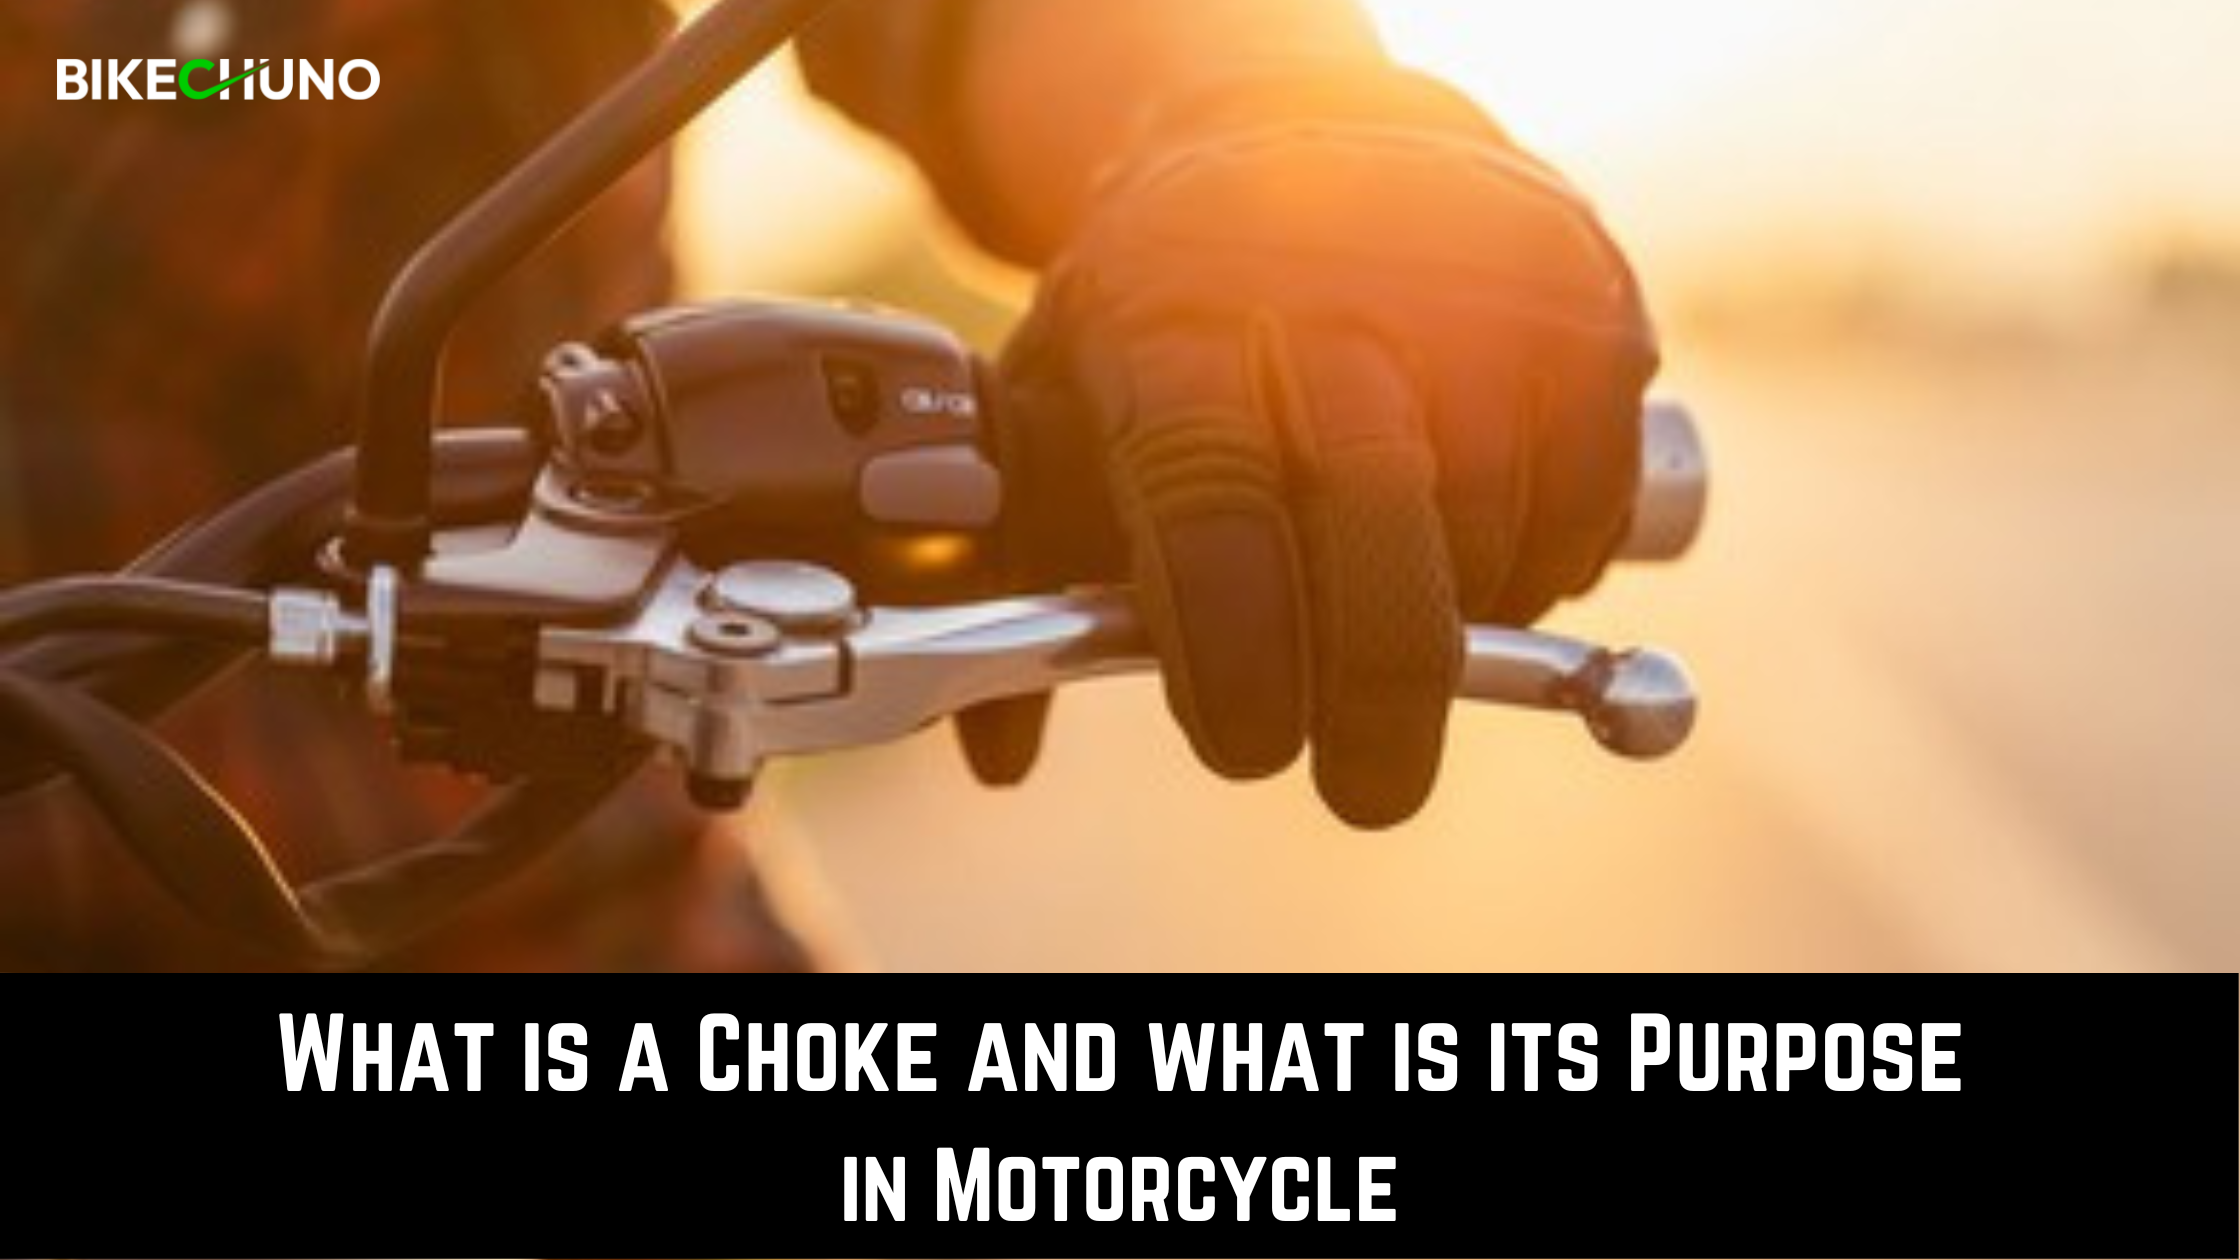 What is a Choke and what is its Purpose in Motorcycle